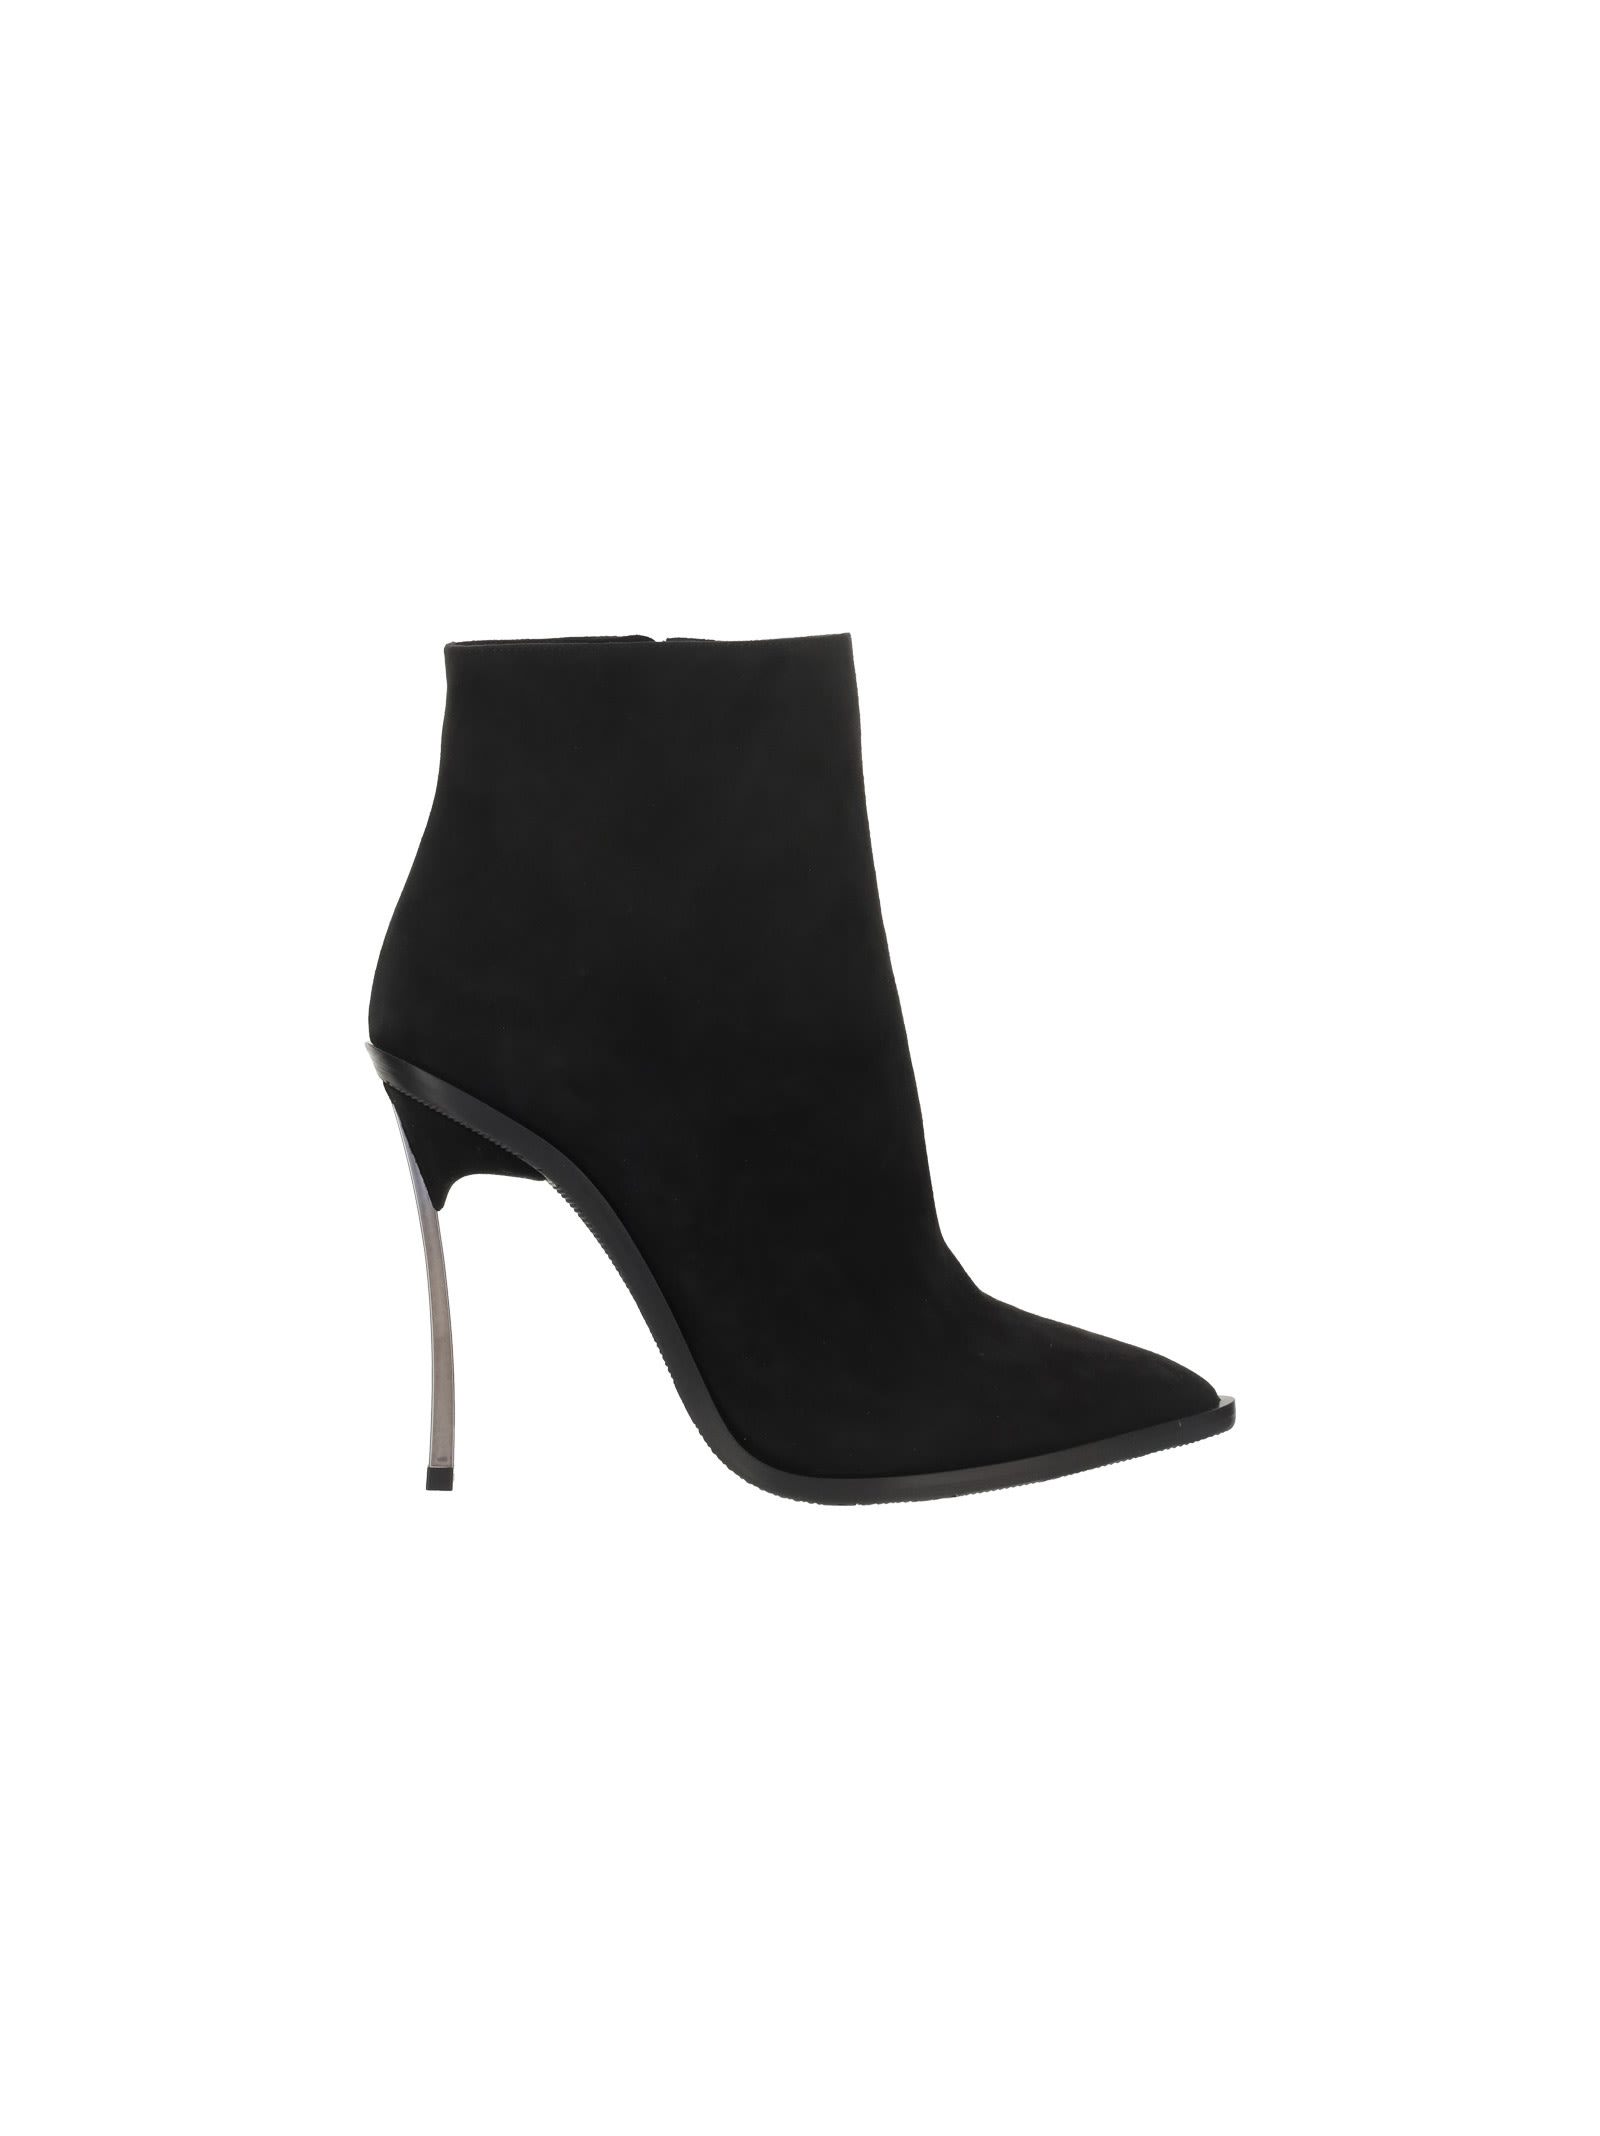 Casadei Boots With Heel